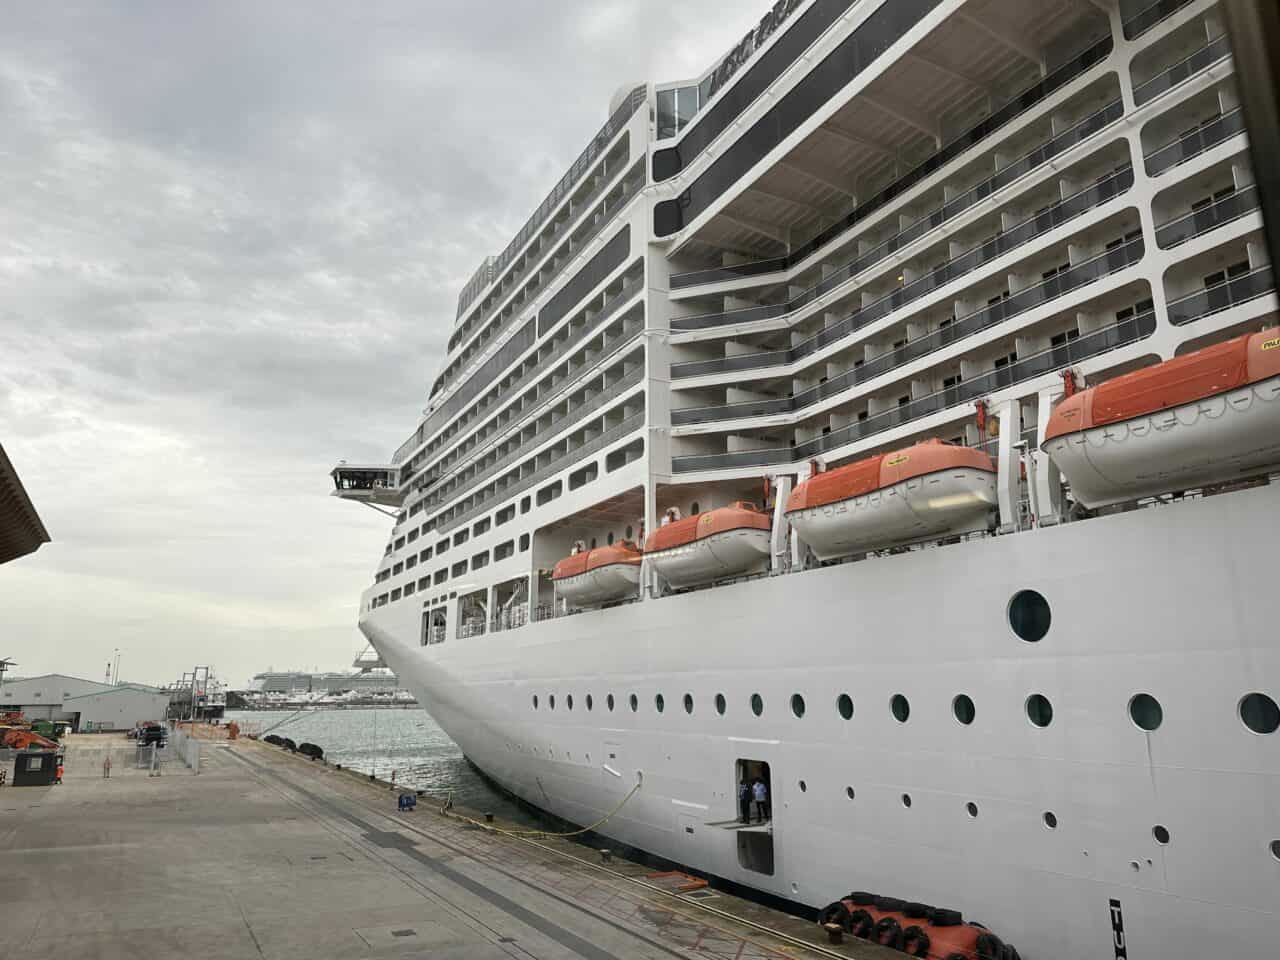 MSC Preziosa as viewed during boarding